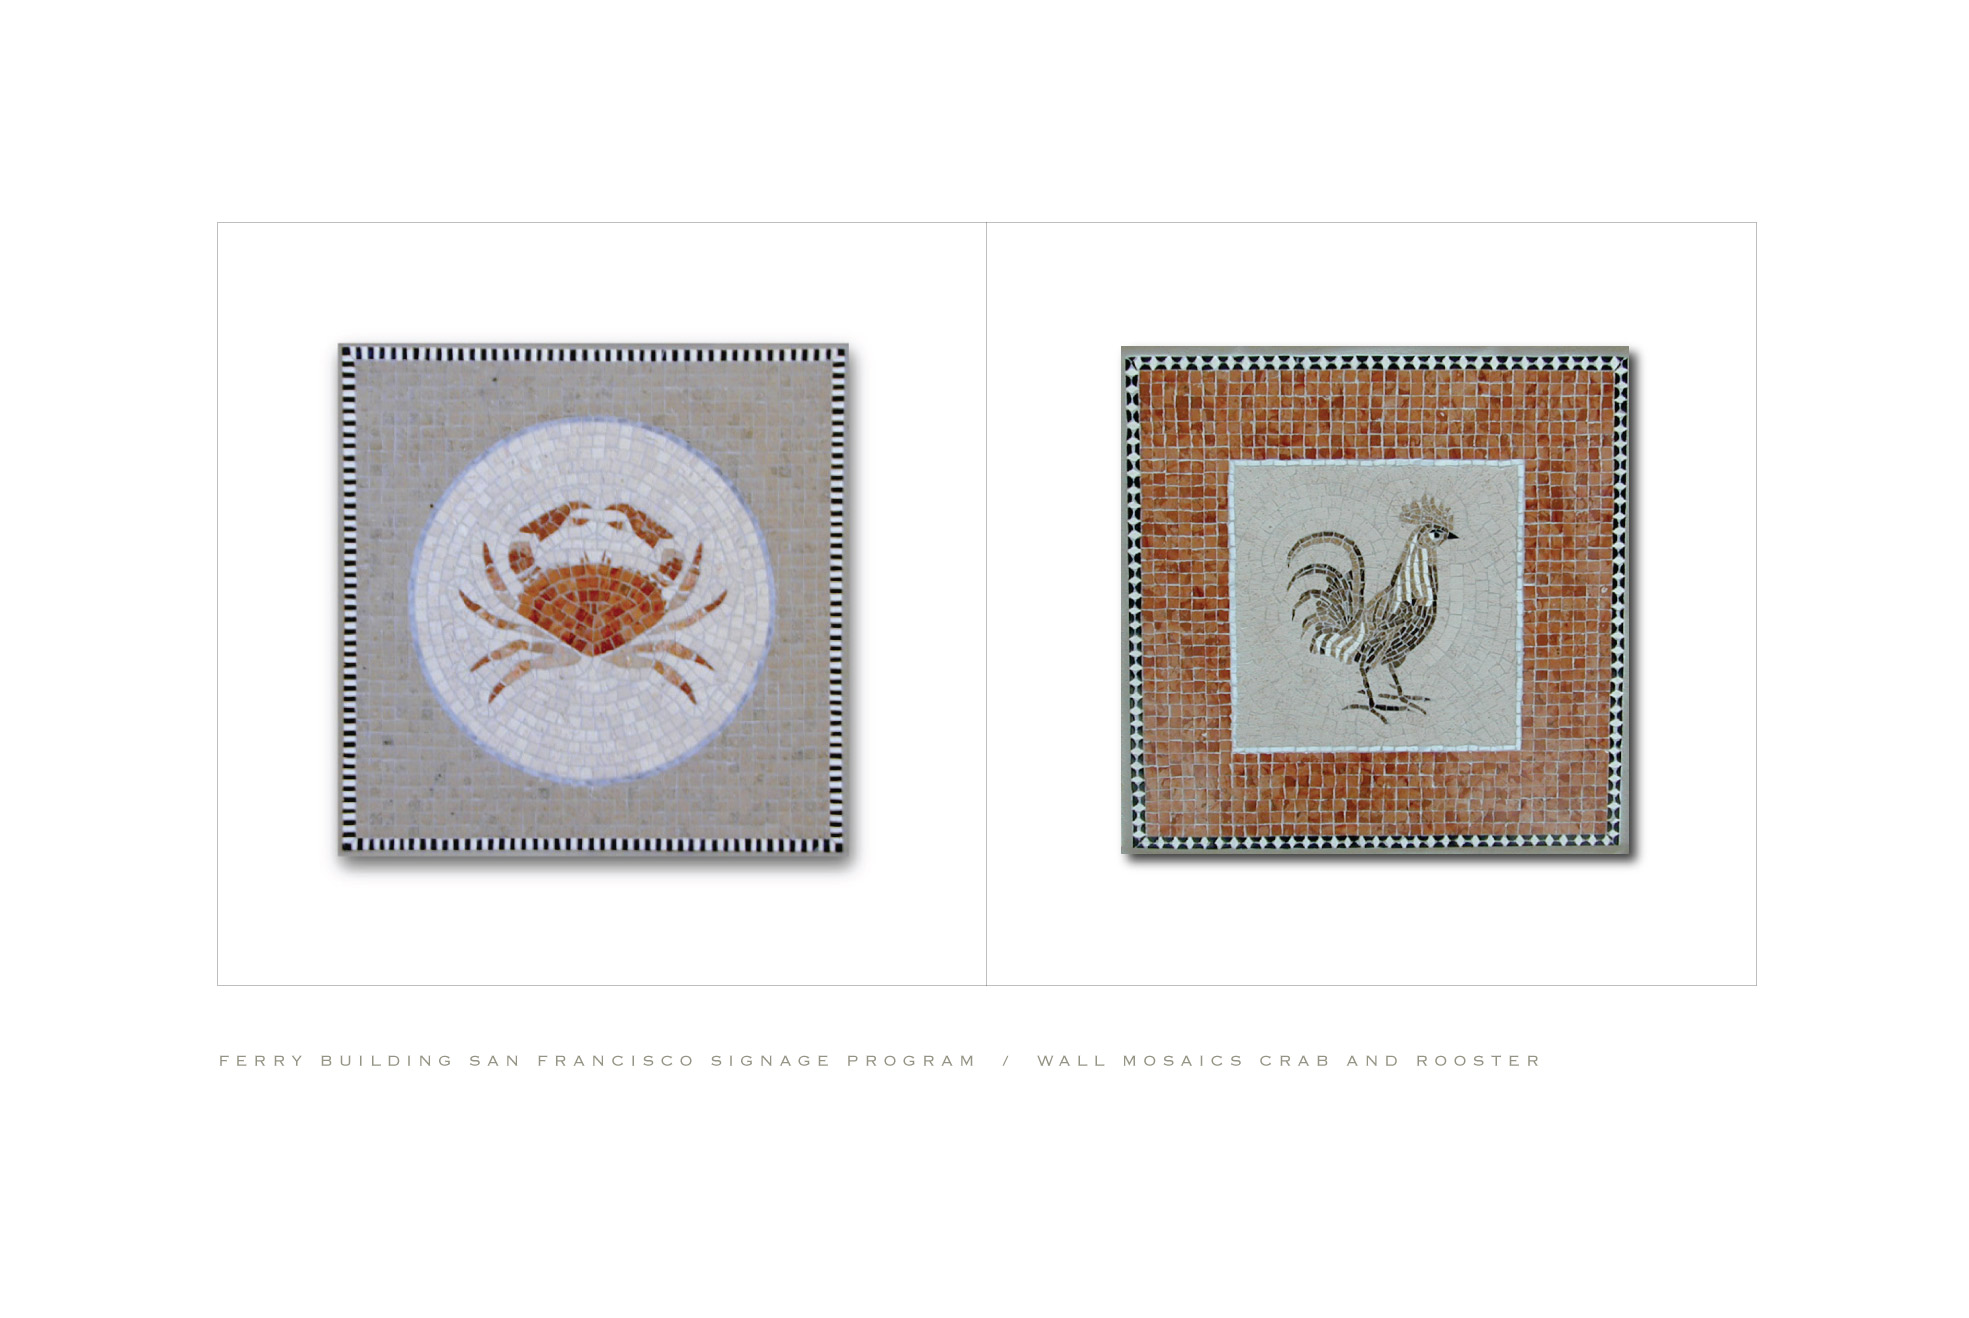 FERRY-MOSAICS-CRAB-&-ROOSTER-UPLOAD.jpg